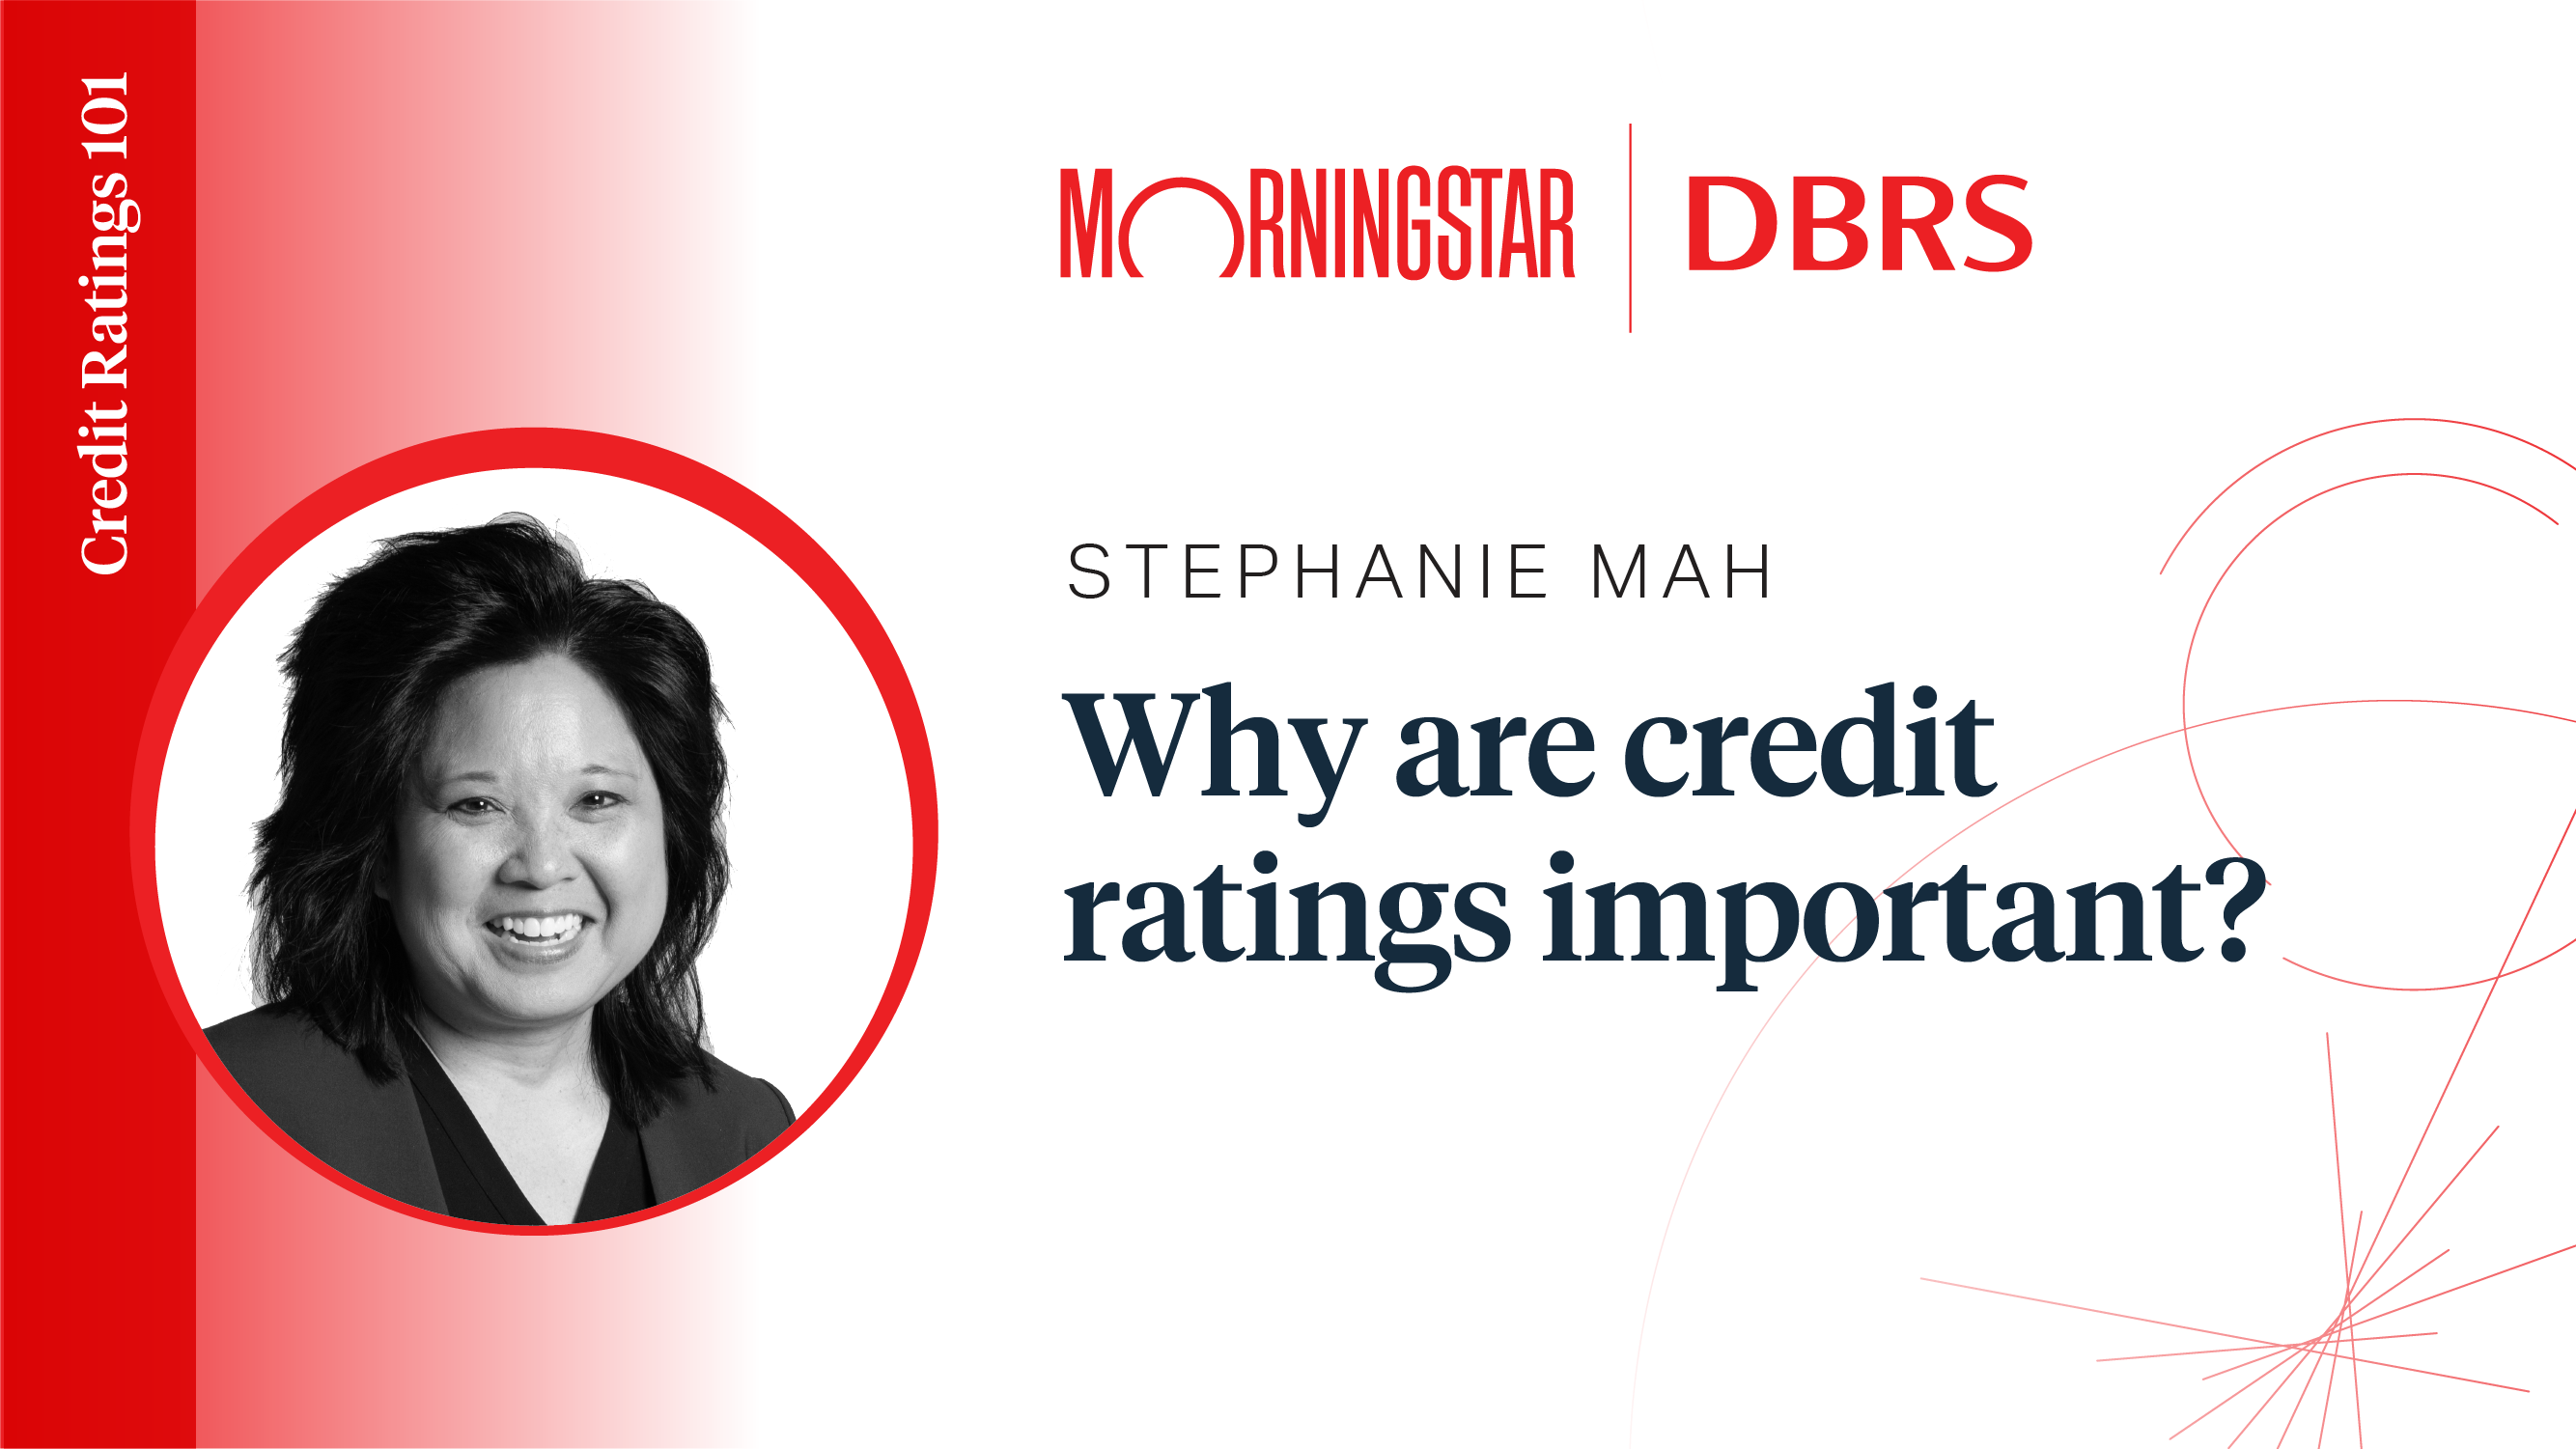 Credit Ratings 101: Stephanie Mah - Why are Credit Ratings Important?